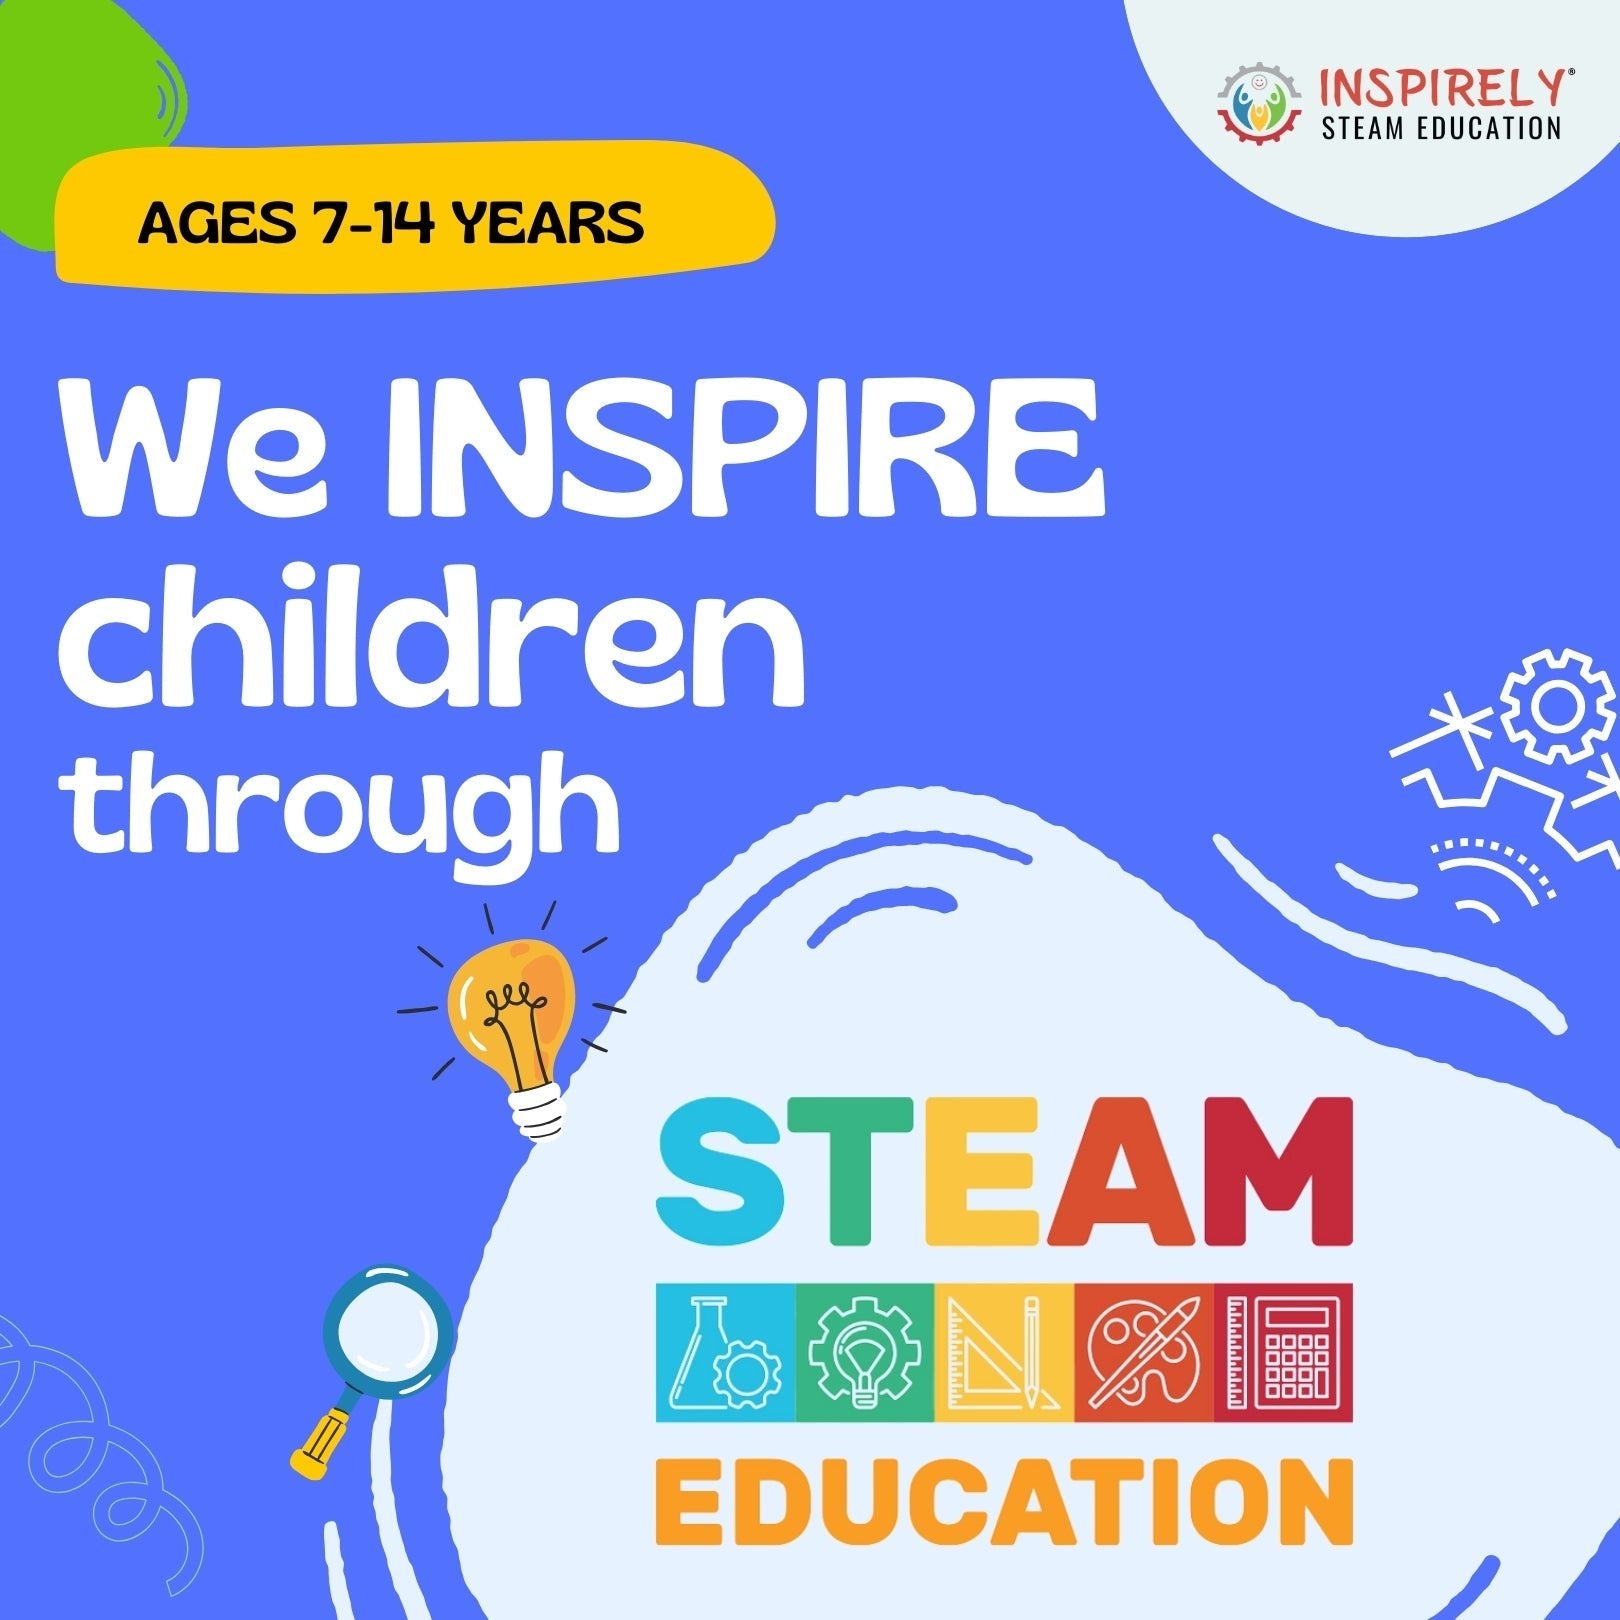 INSPIRELY | STEAM Education mobile app course workshops classes at Brampton Triveni Mandir and Community Center Children programs workshops camps classes Artificial Intelligence & Machine Learning (robotics) after-school children Ages 11 to 14 years boy girl kid teen STEM STEAM Education teens kids Brampton West Caledon Mississauga Georgetown top featured best institute 2023 near me